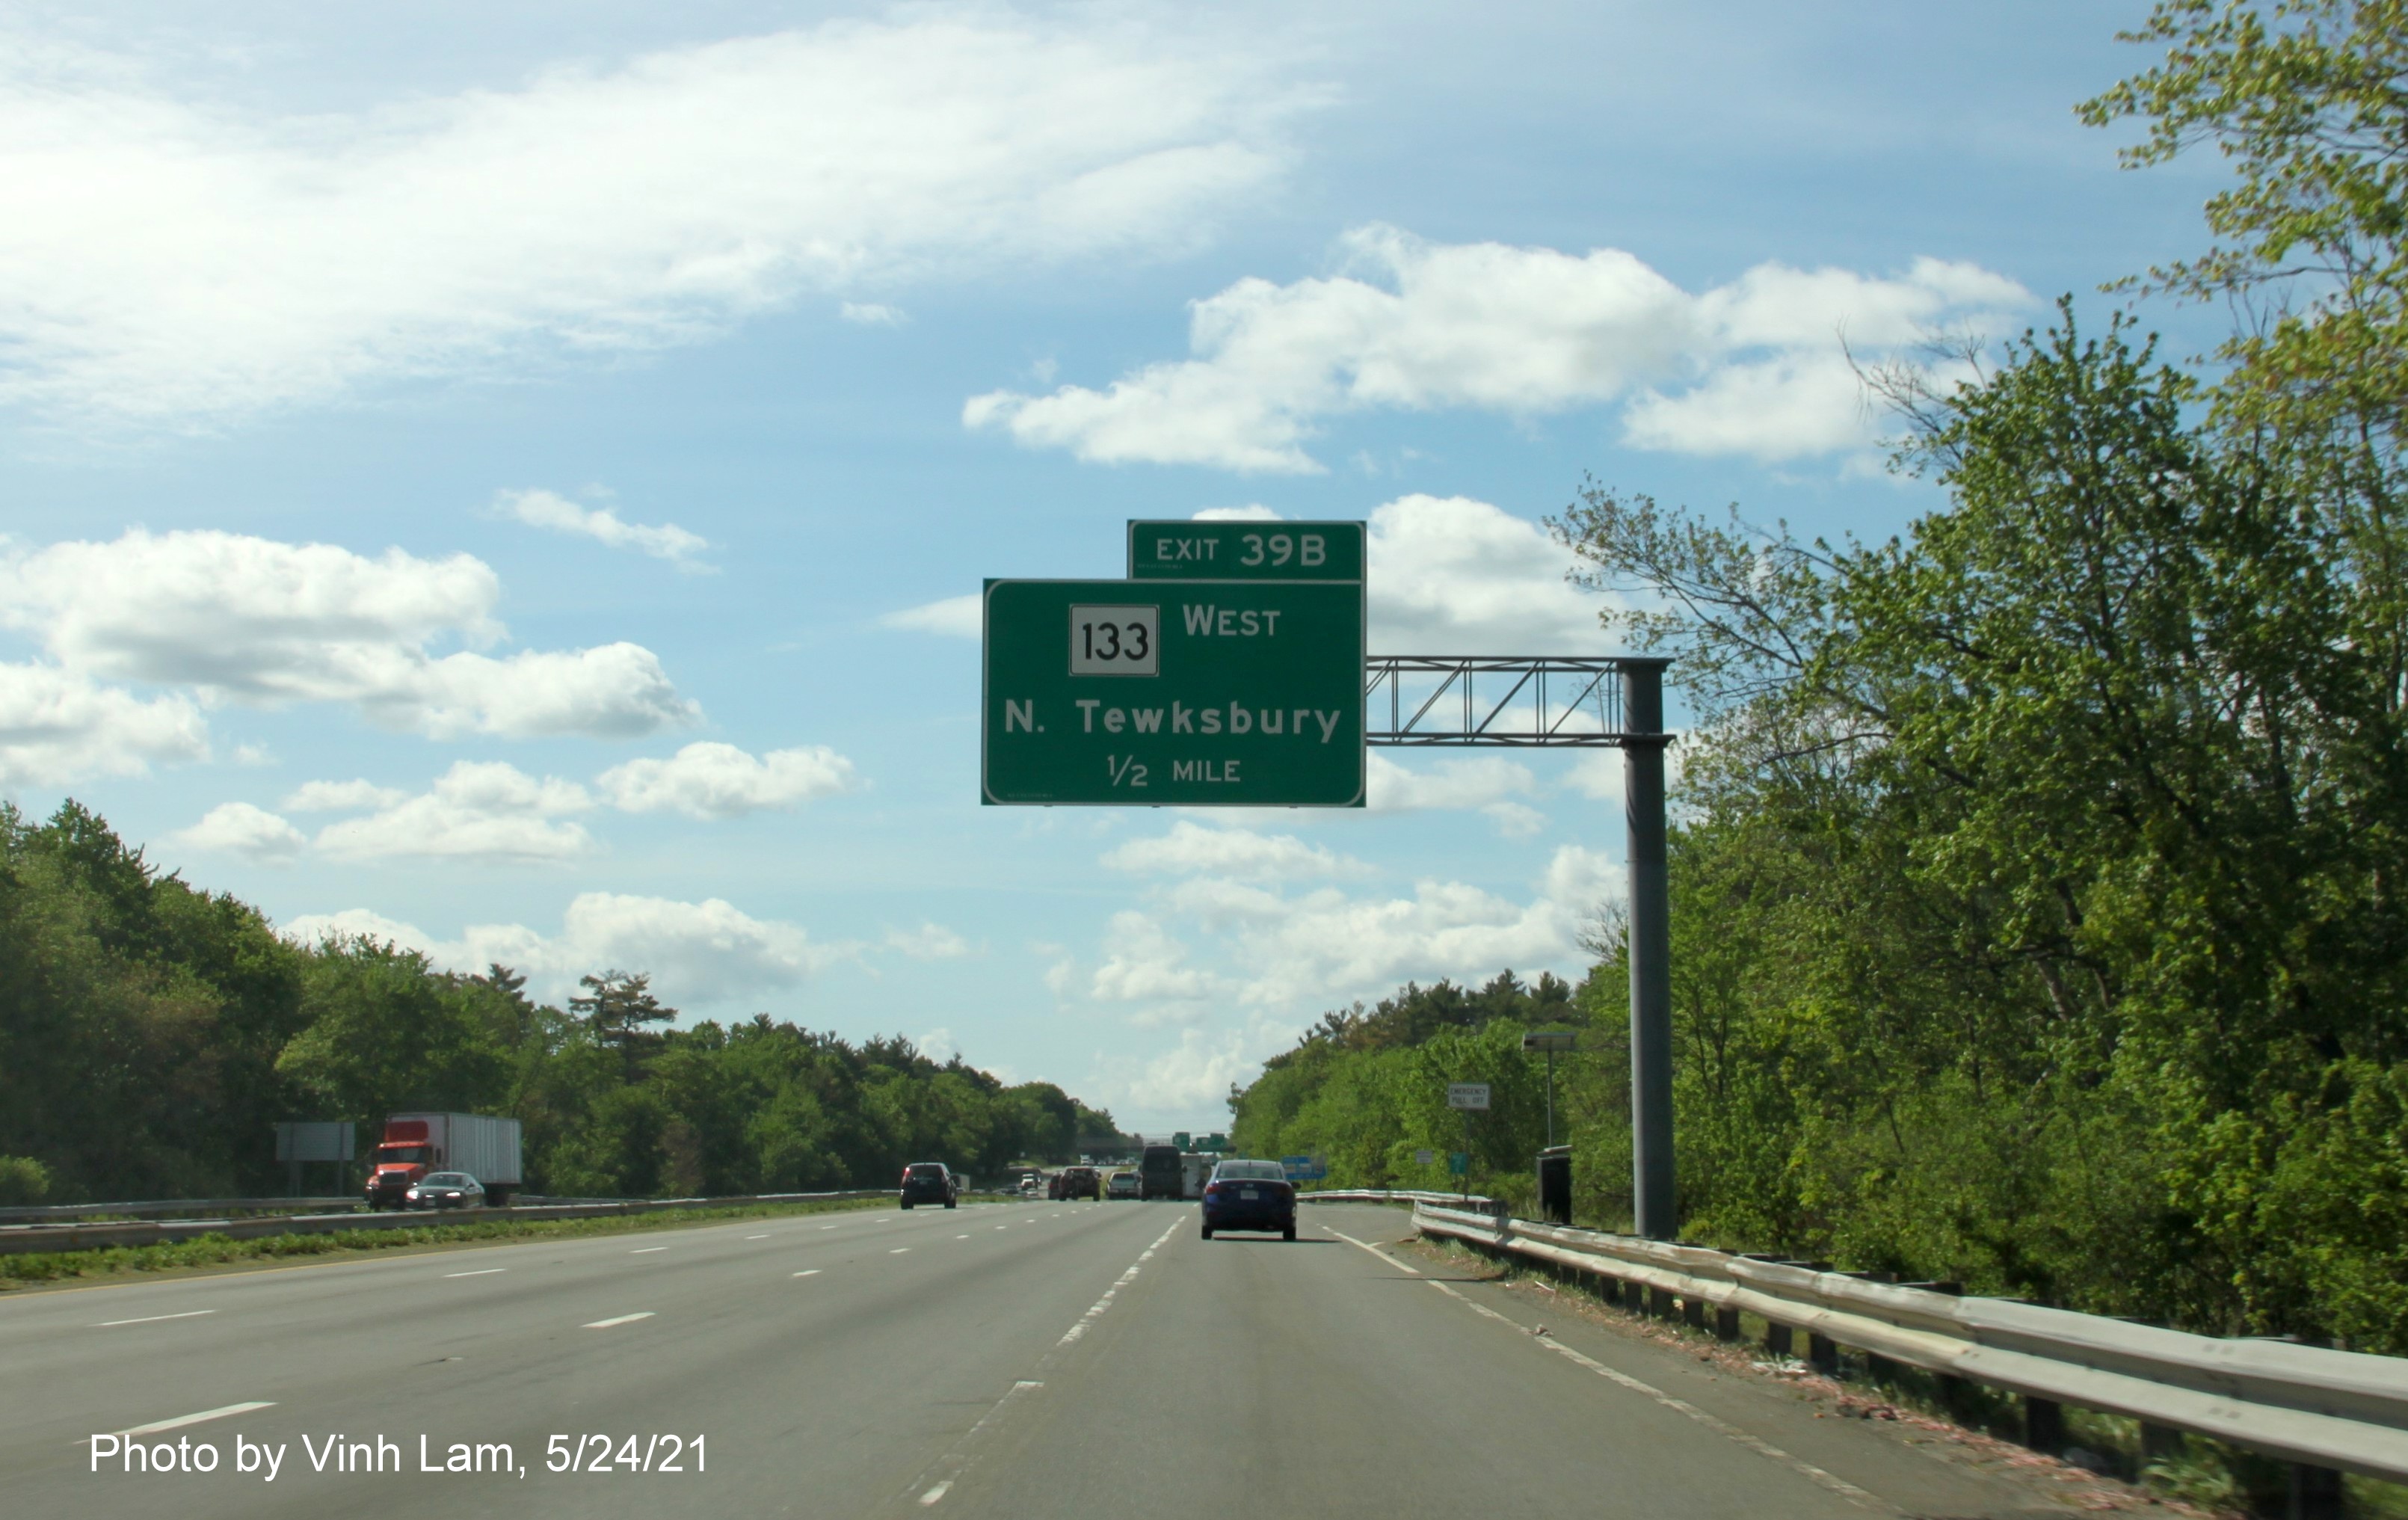 Image of 1/2 mile advance overhead sign for MA 133 West exit with new milepost based exit number on I-93 South in Andover, by Vinh Lam, May 2021